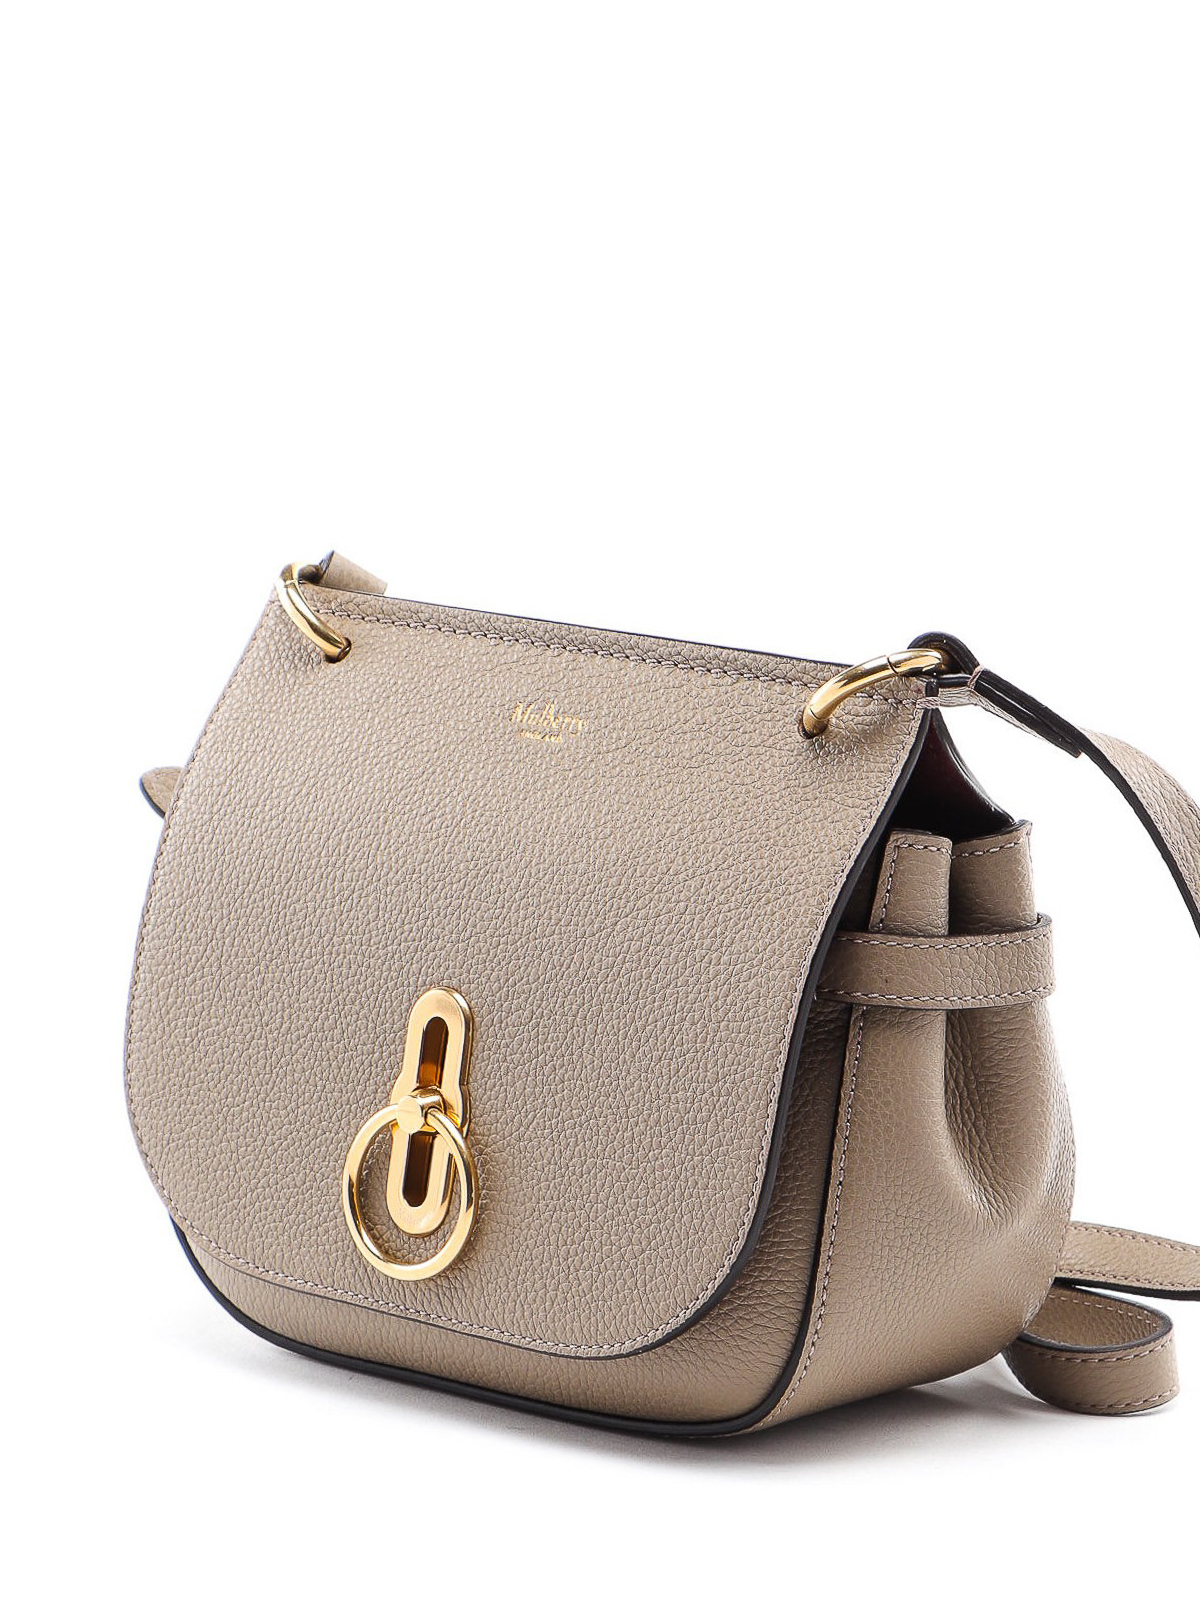 Cross body bags Mulberry - Small Amberley leather satchel 